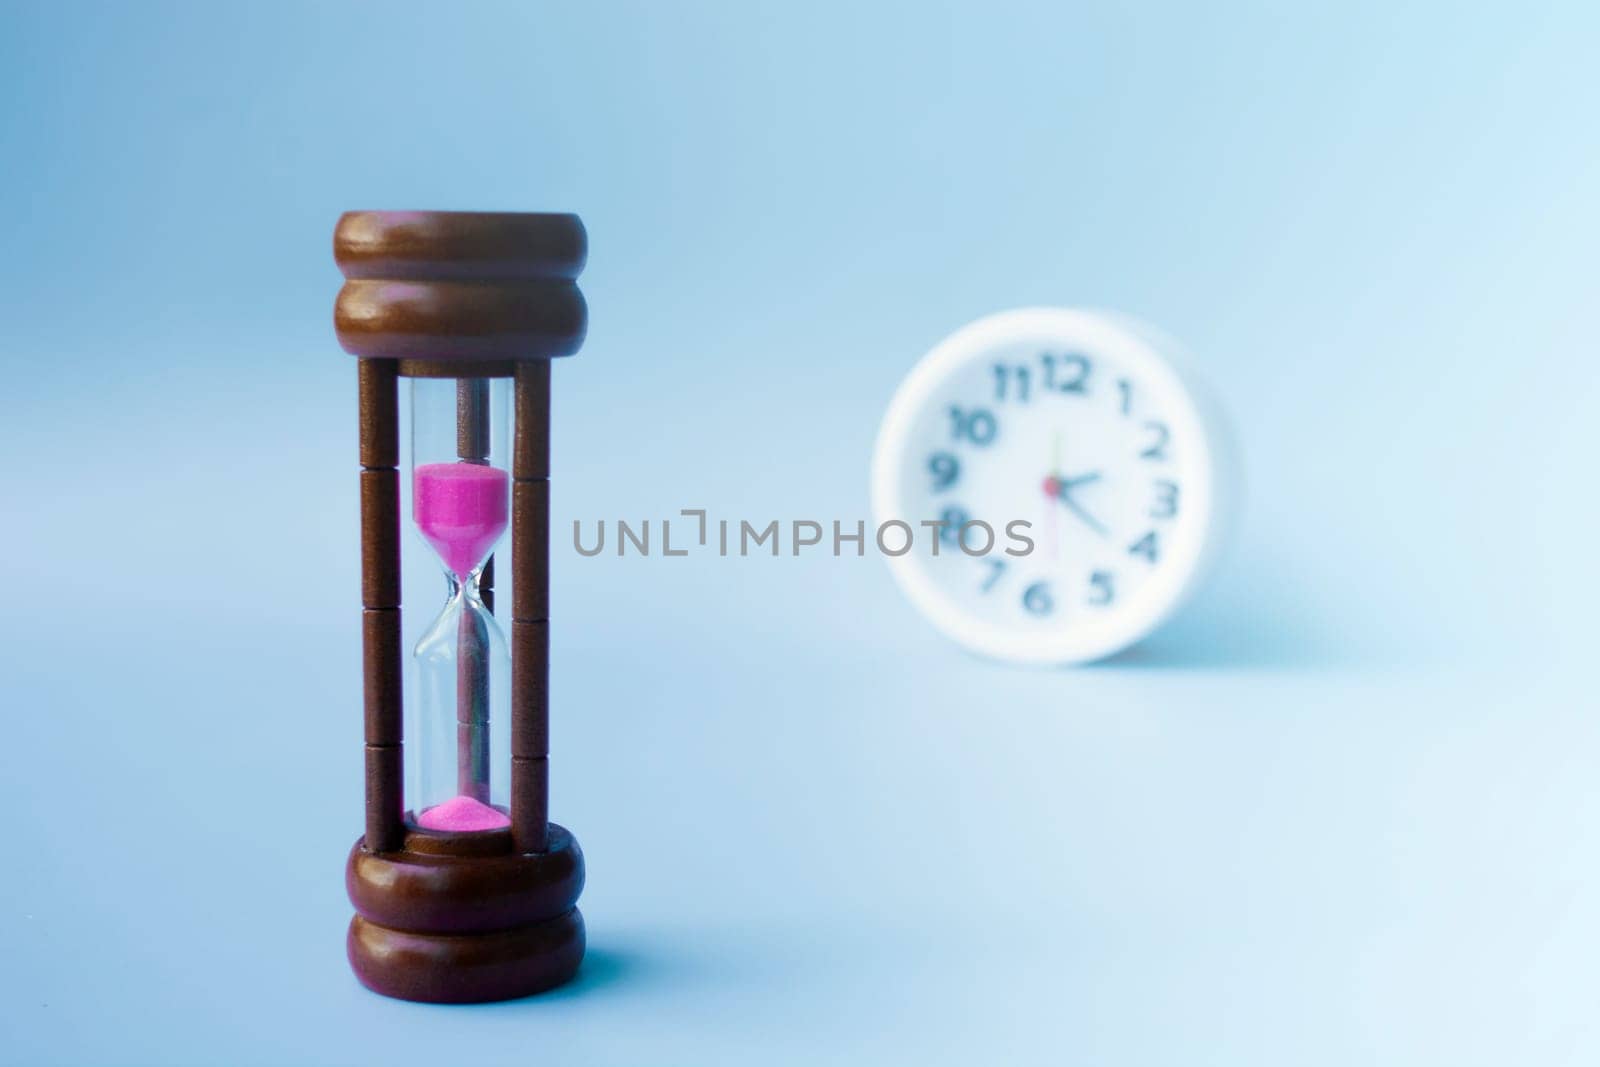 Hourglass as time passing concept for business deadline and running out of time